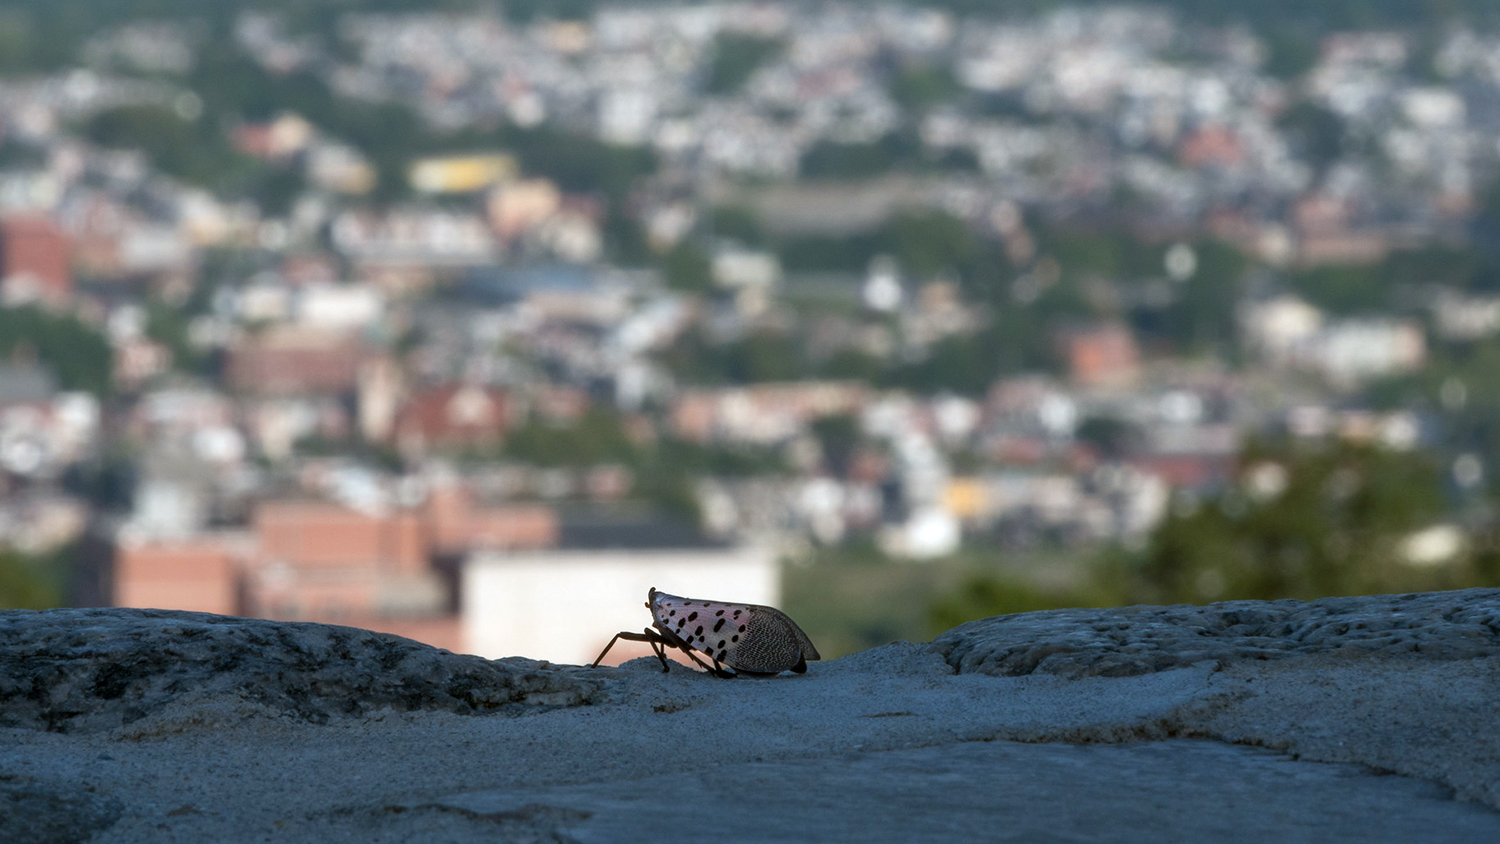 spotted lanternfly adult with town in background